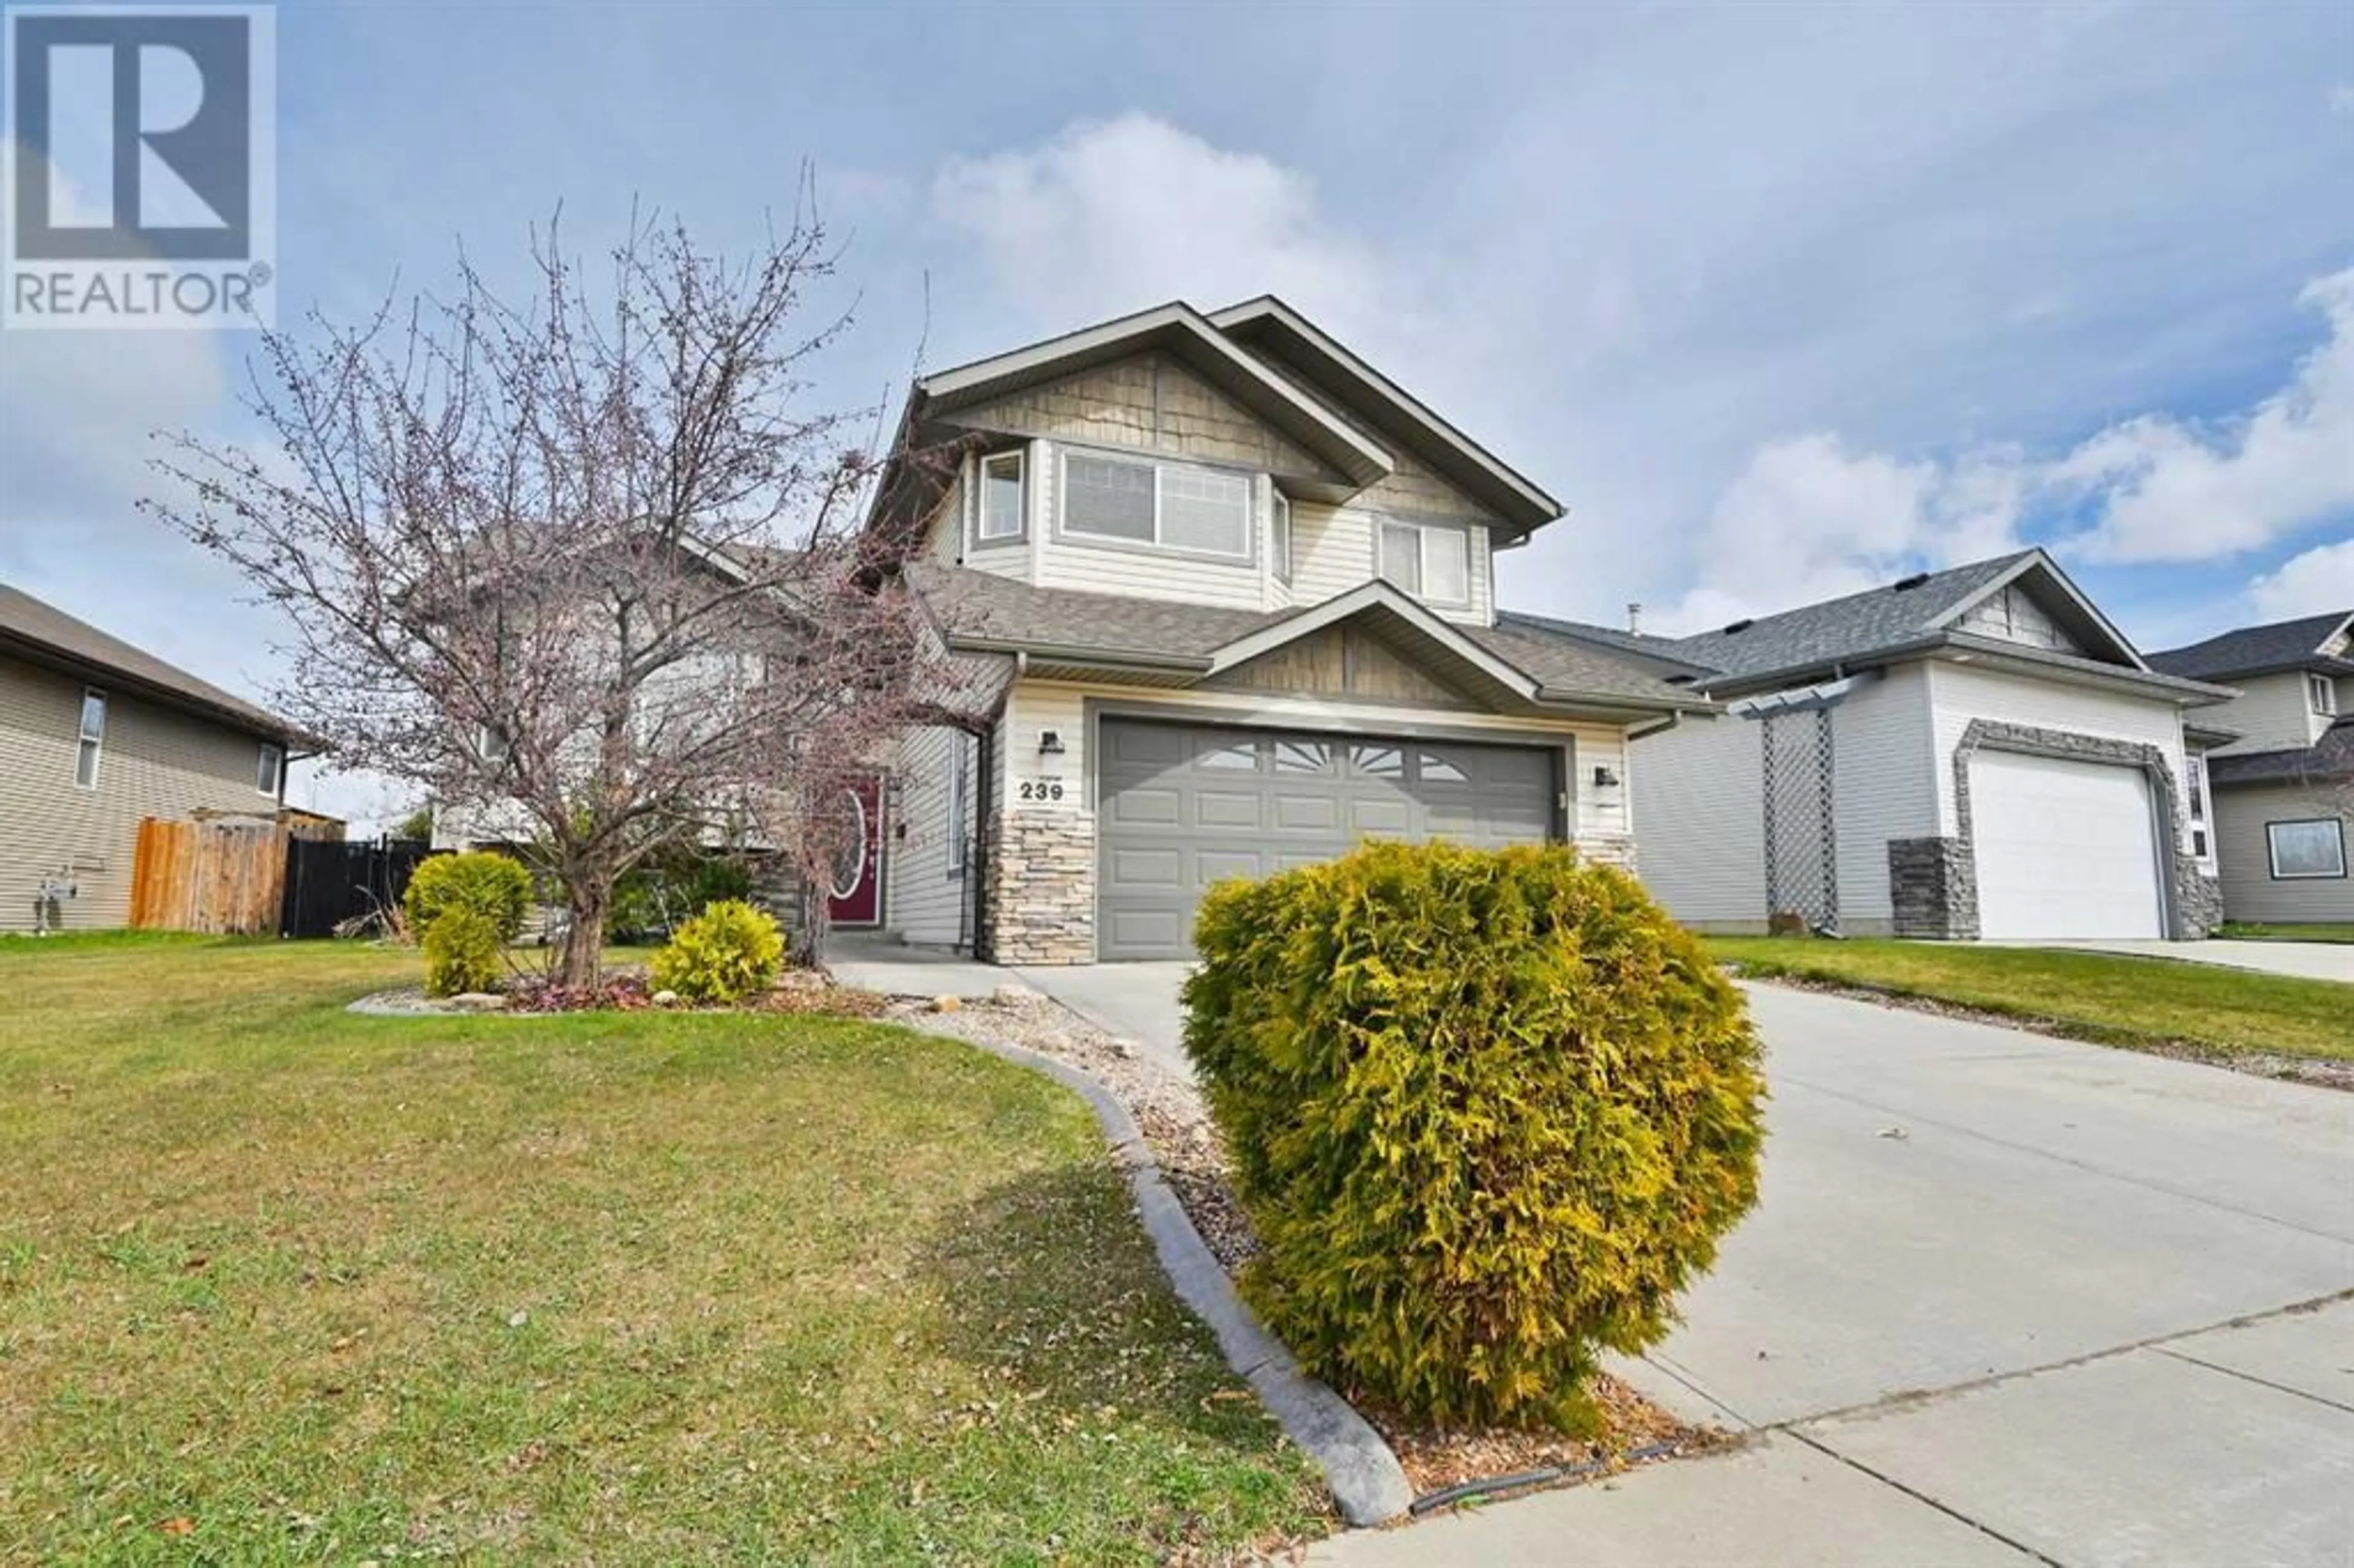 Frontside or backside of a home for 239 Illingworth Close, Red Deer Alberta T4R0B3